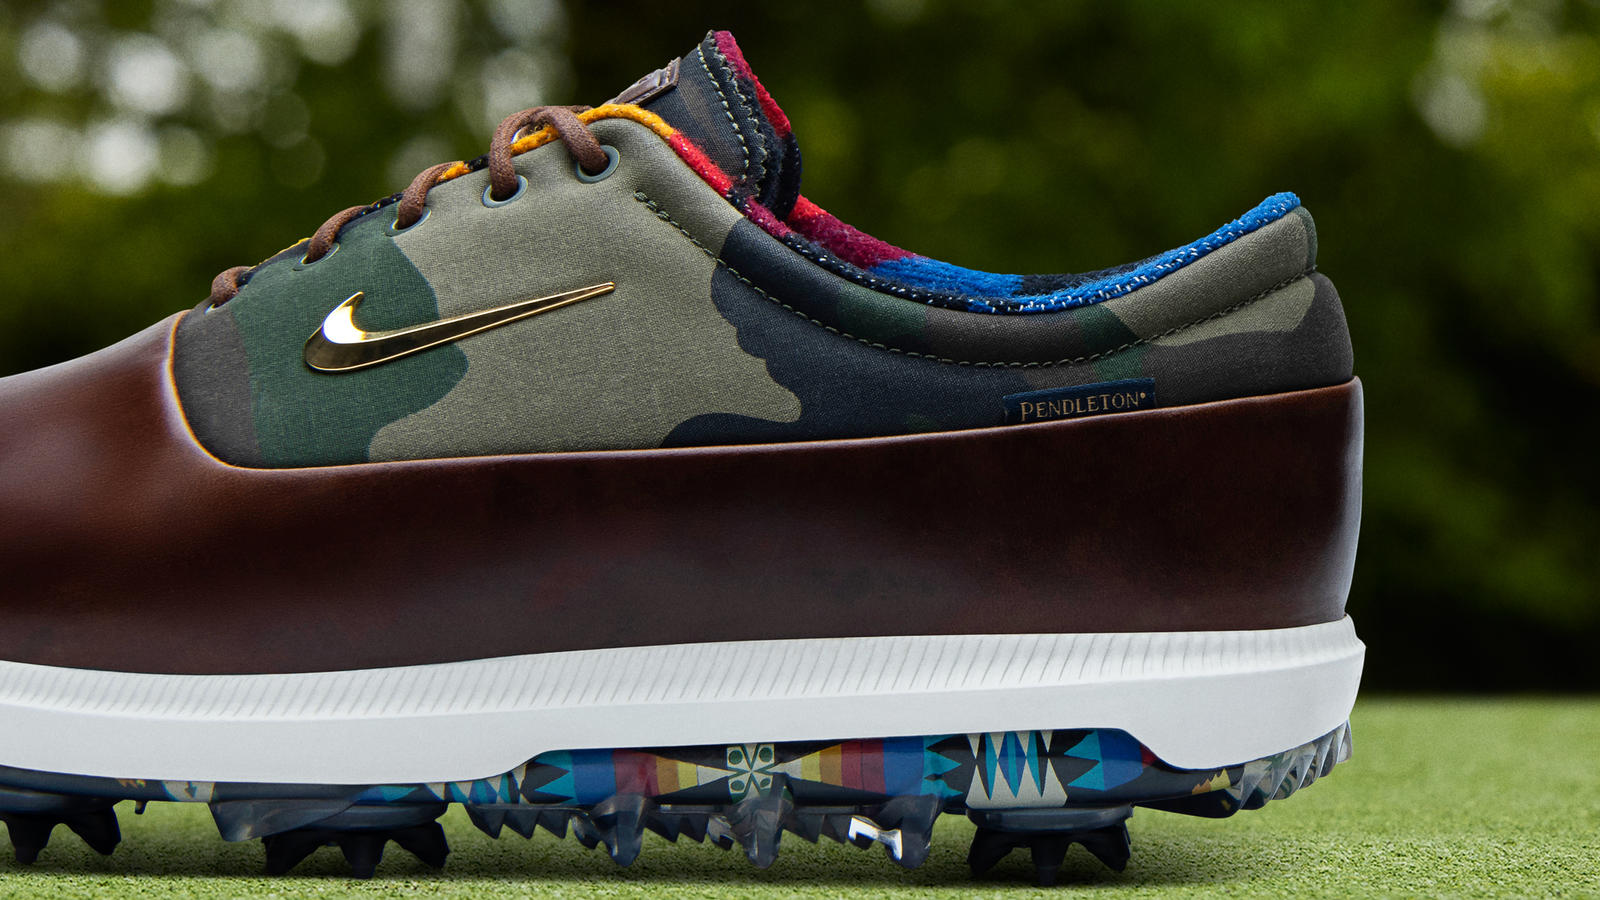 Seamus Nike Golf Air Zoom Victory Tour Release Date